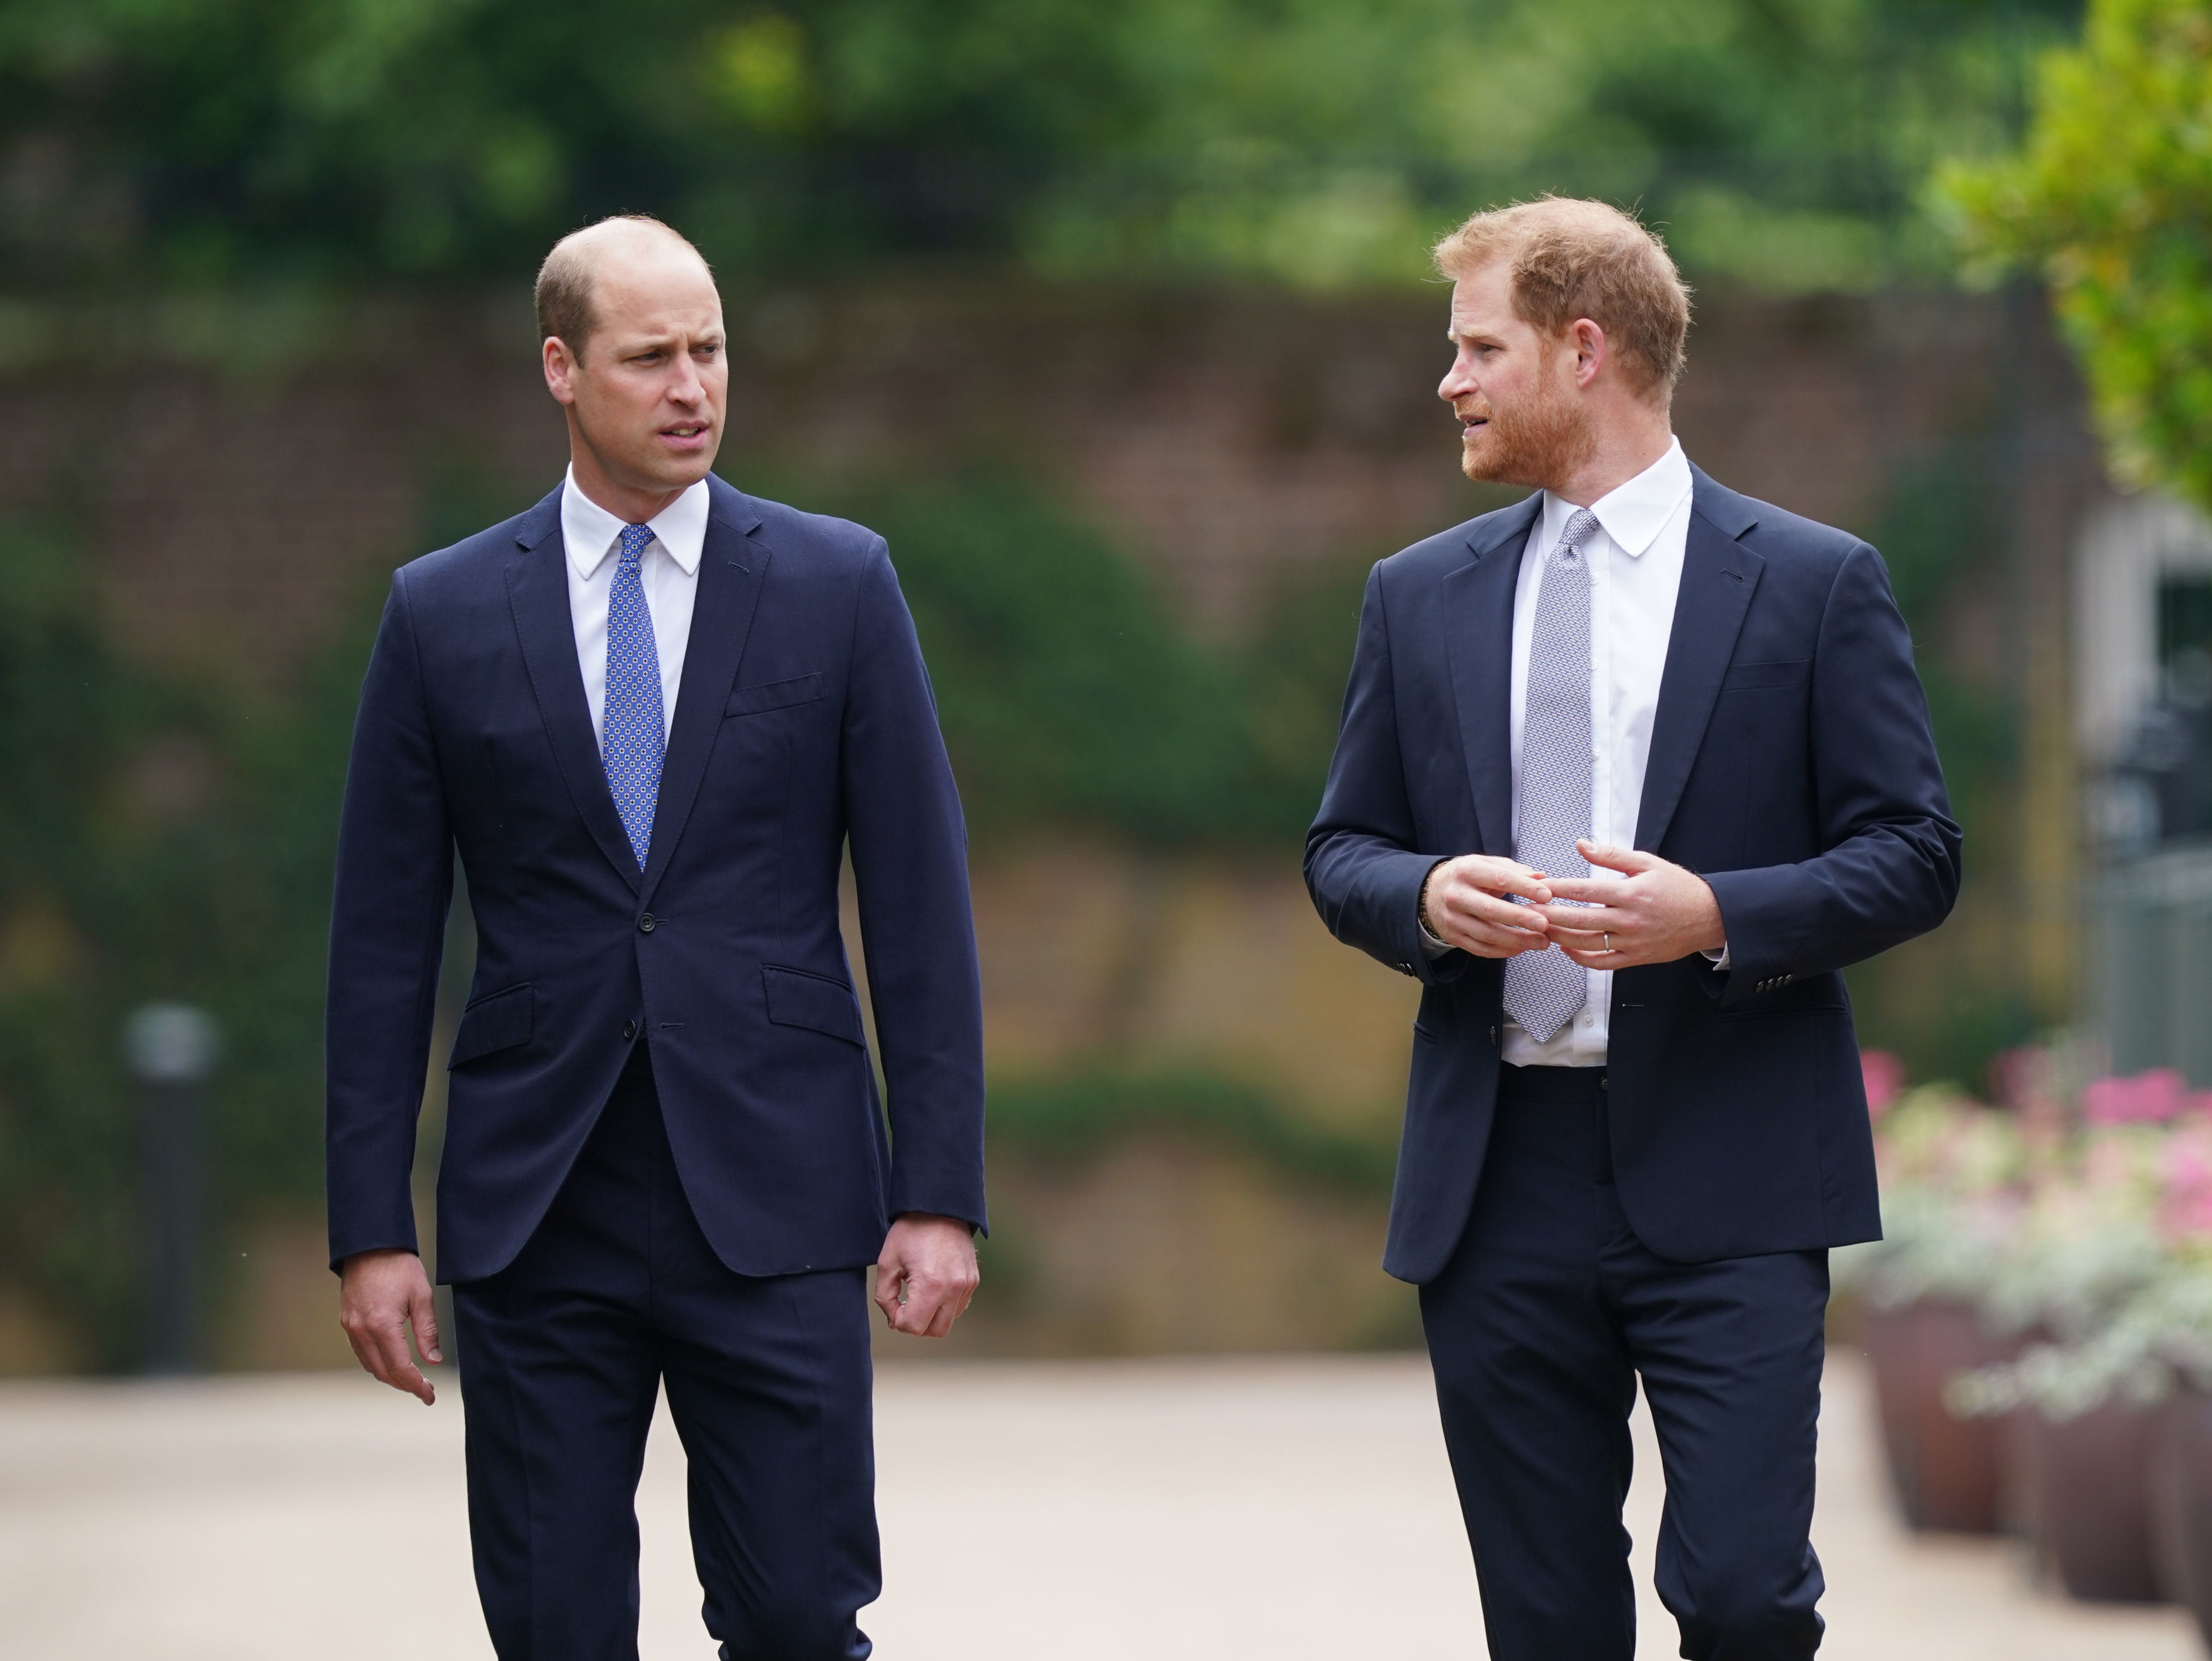 Prince William and Prince Harry at the unveiling of their late mother, Princess Diana's statue that they commissioned of her in London, England on July 1, 2021 | Source: Getty Images